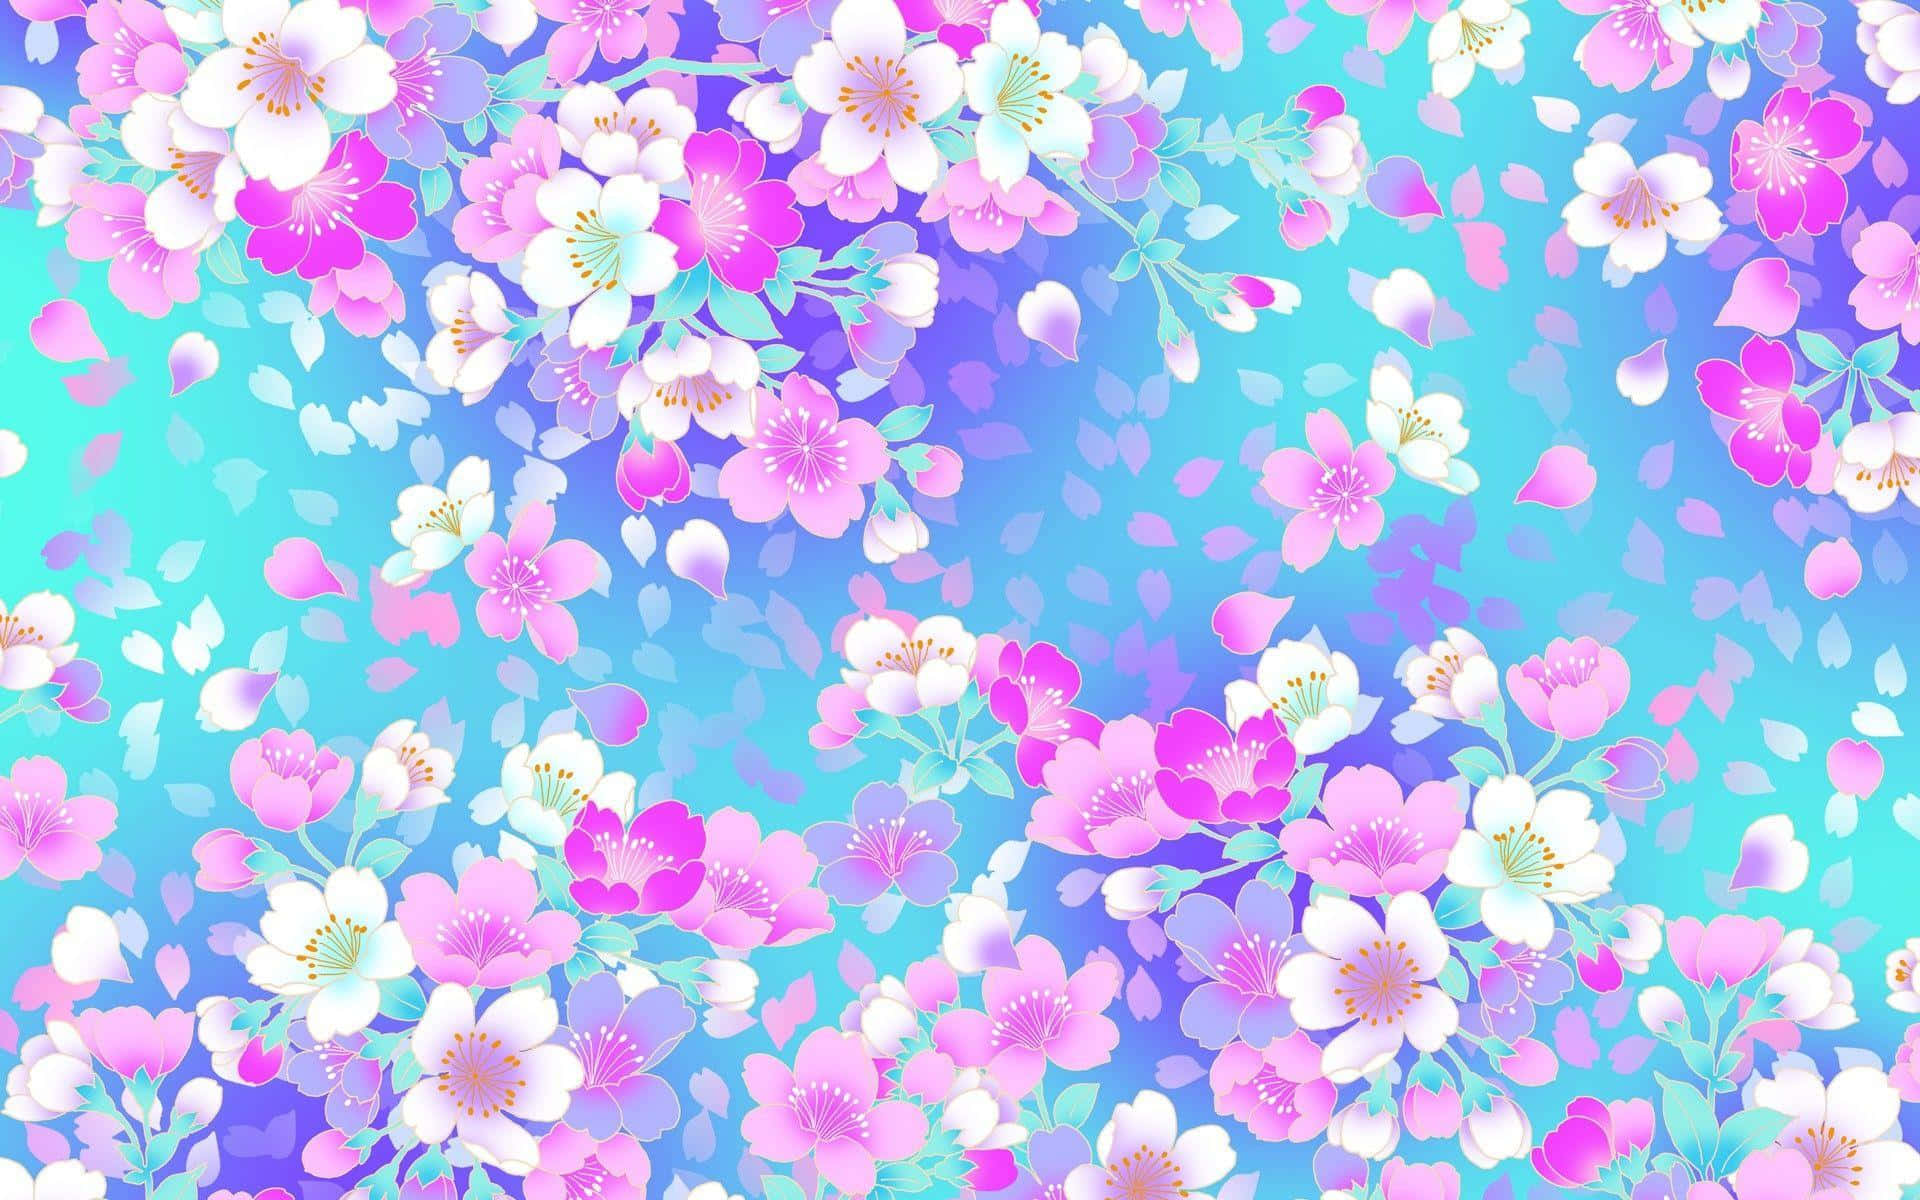 A Colorful Abstract Blend of Pink and Blue